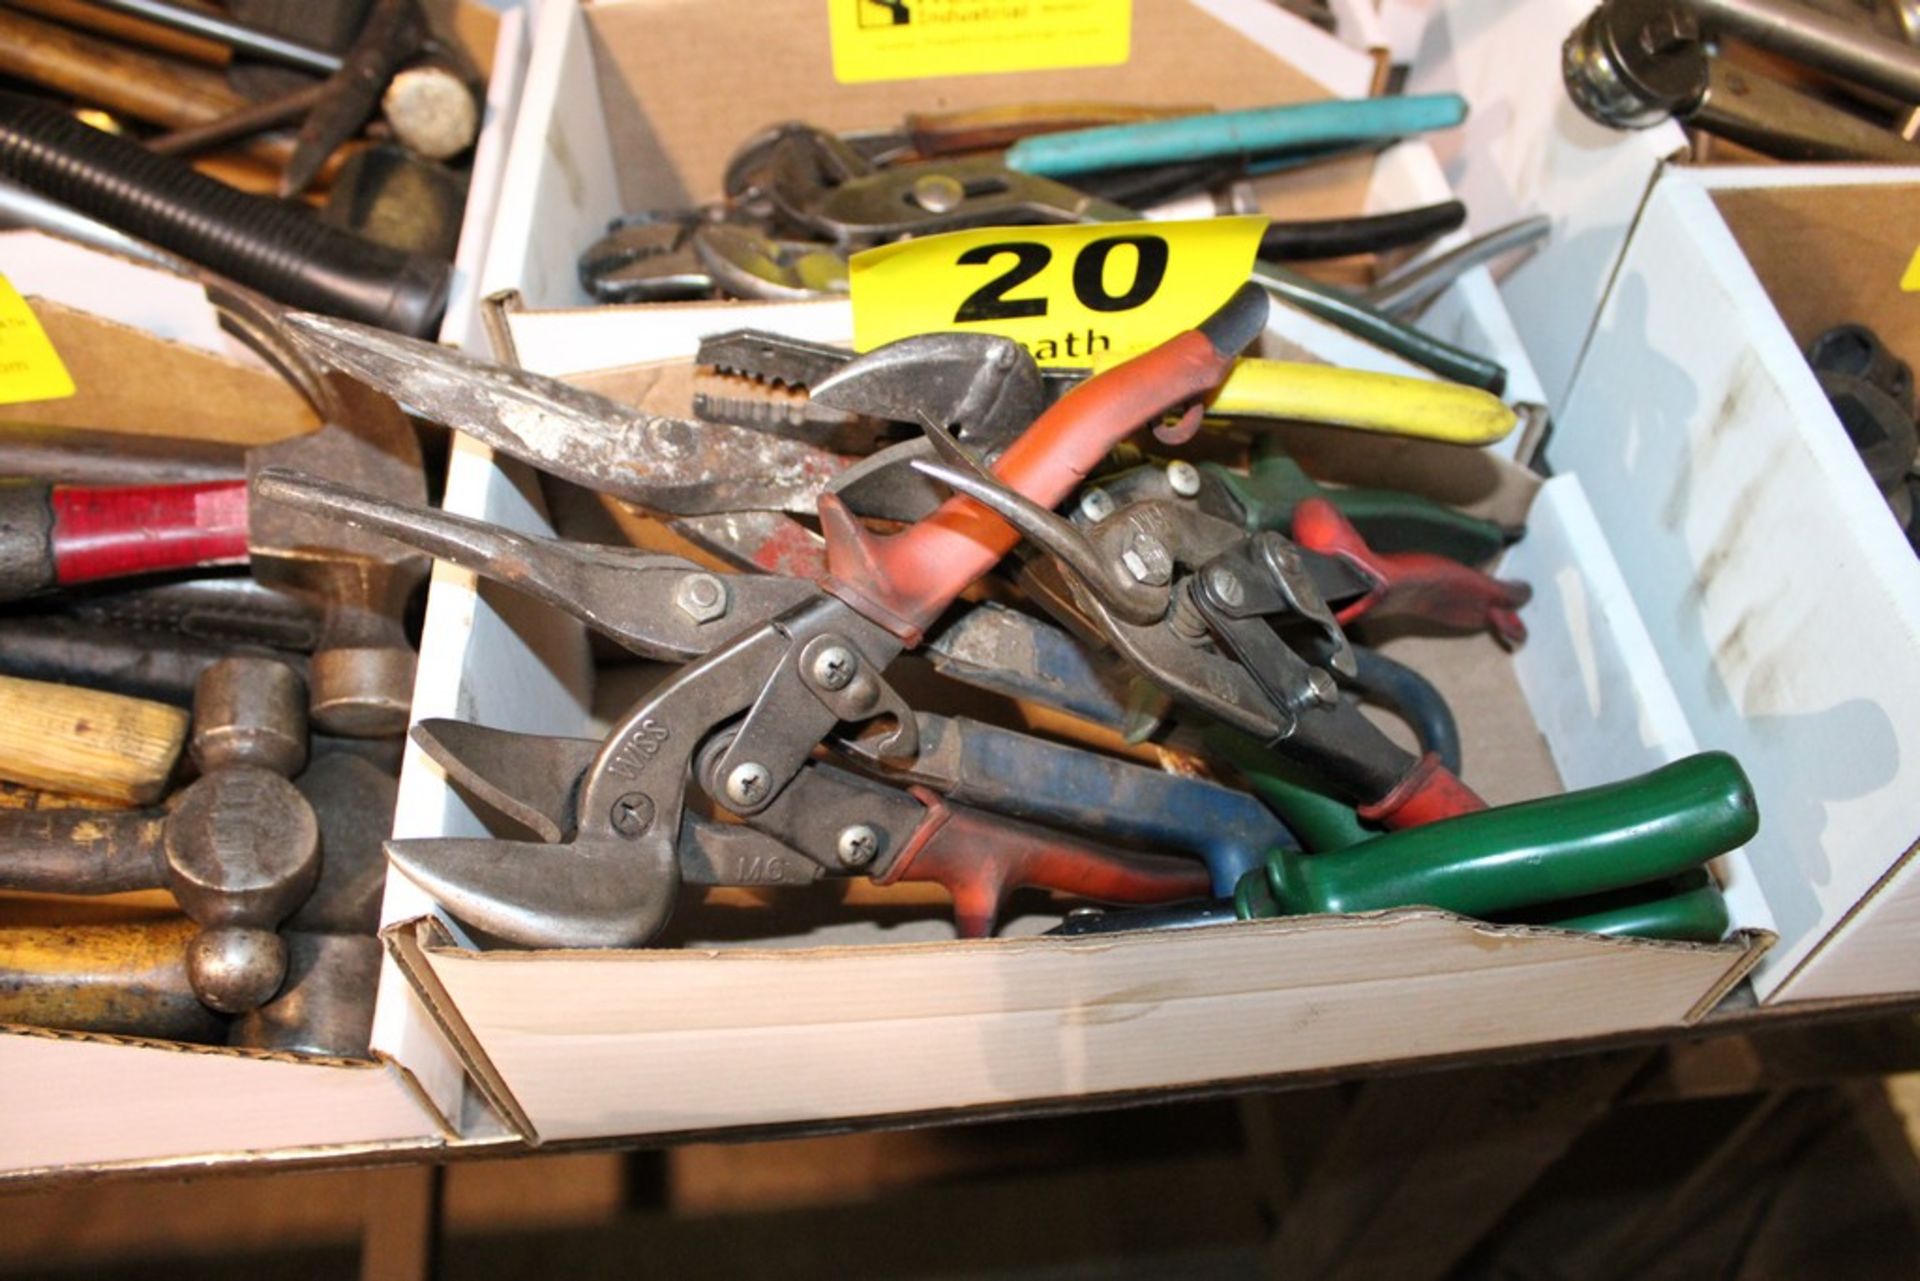 ASSORTED SHEARS IN BOX